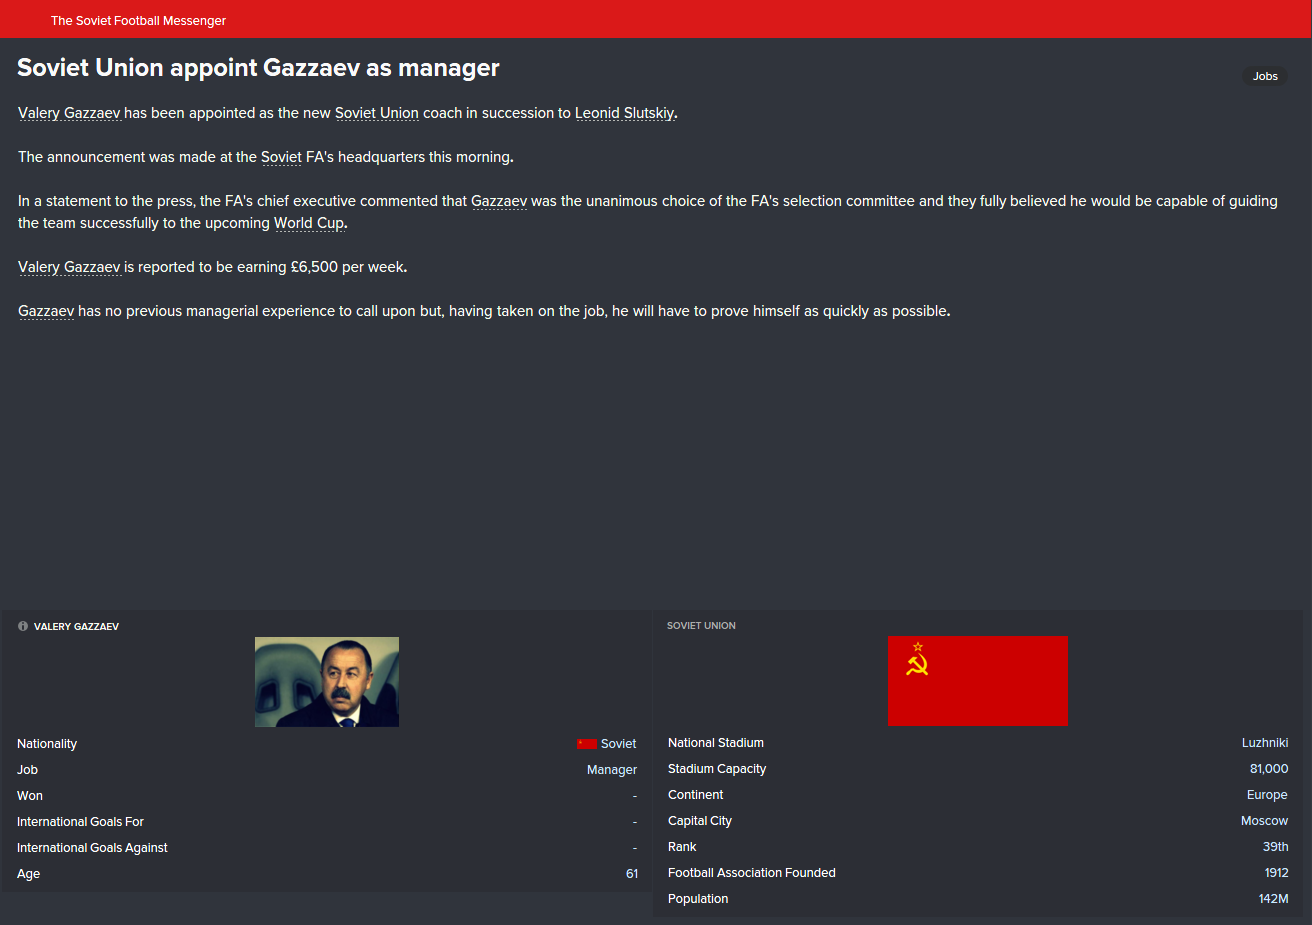 Gazzaev's appointment as the new manager of the Soviet Sbornaya is official. 